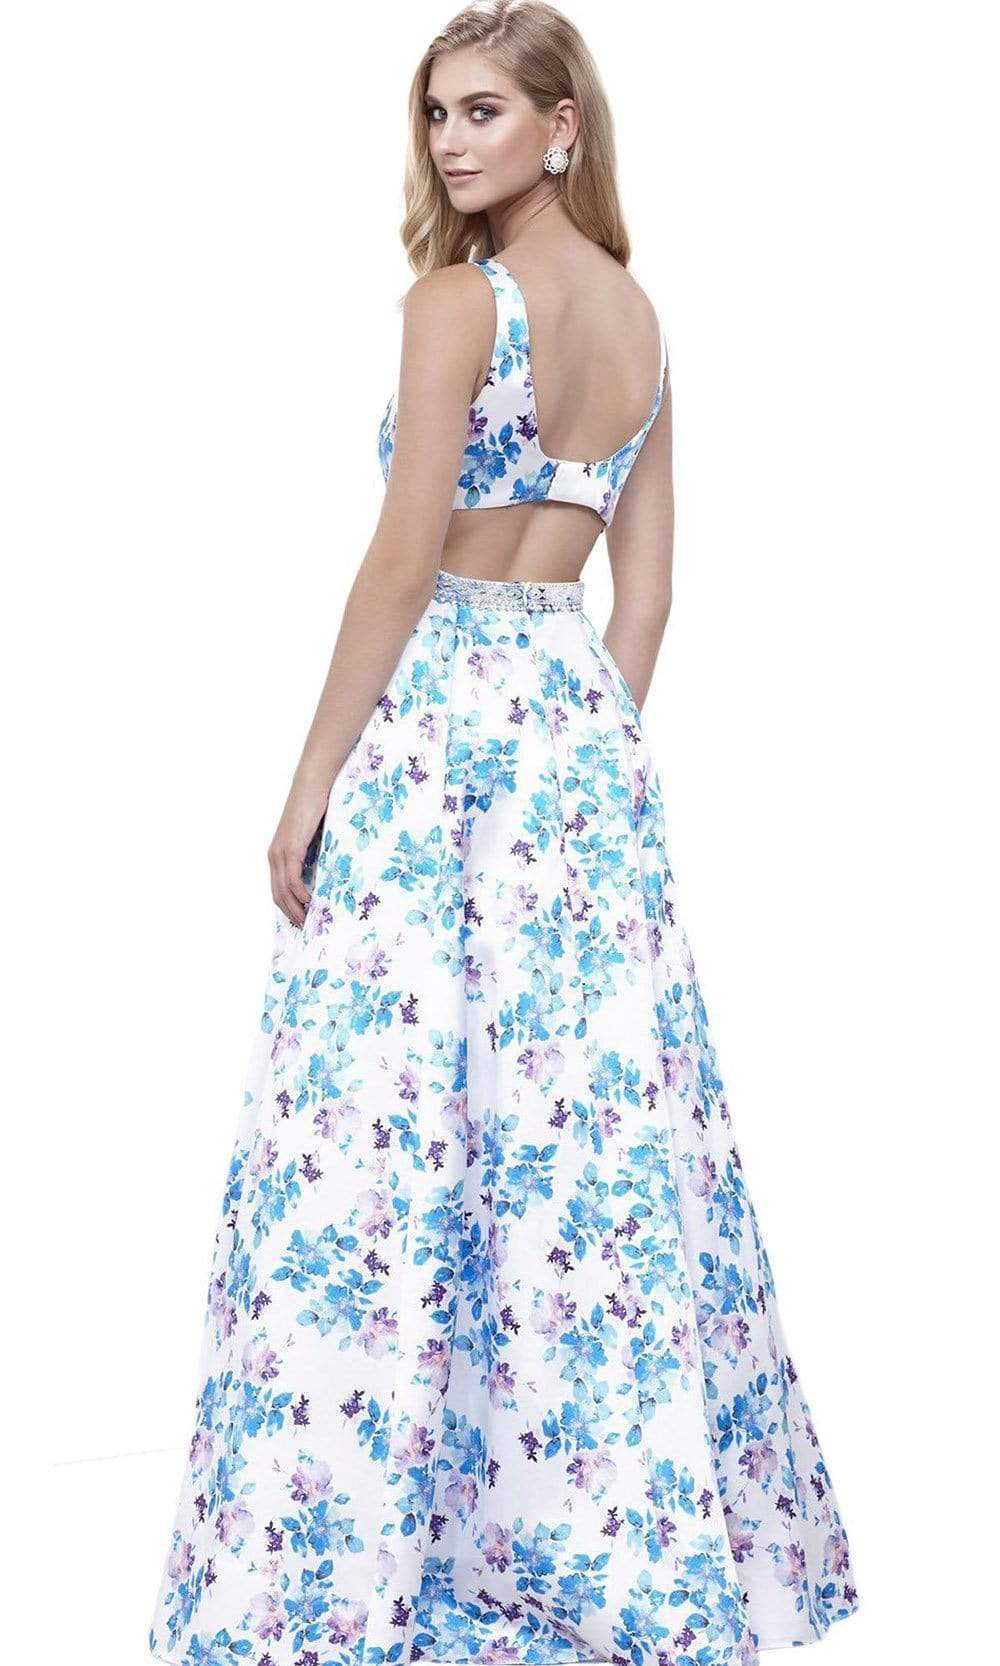 Nox Anabel - 8290 Floral Print Sleeveless Open Back Evening Dress Special Occasion Dress